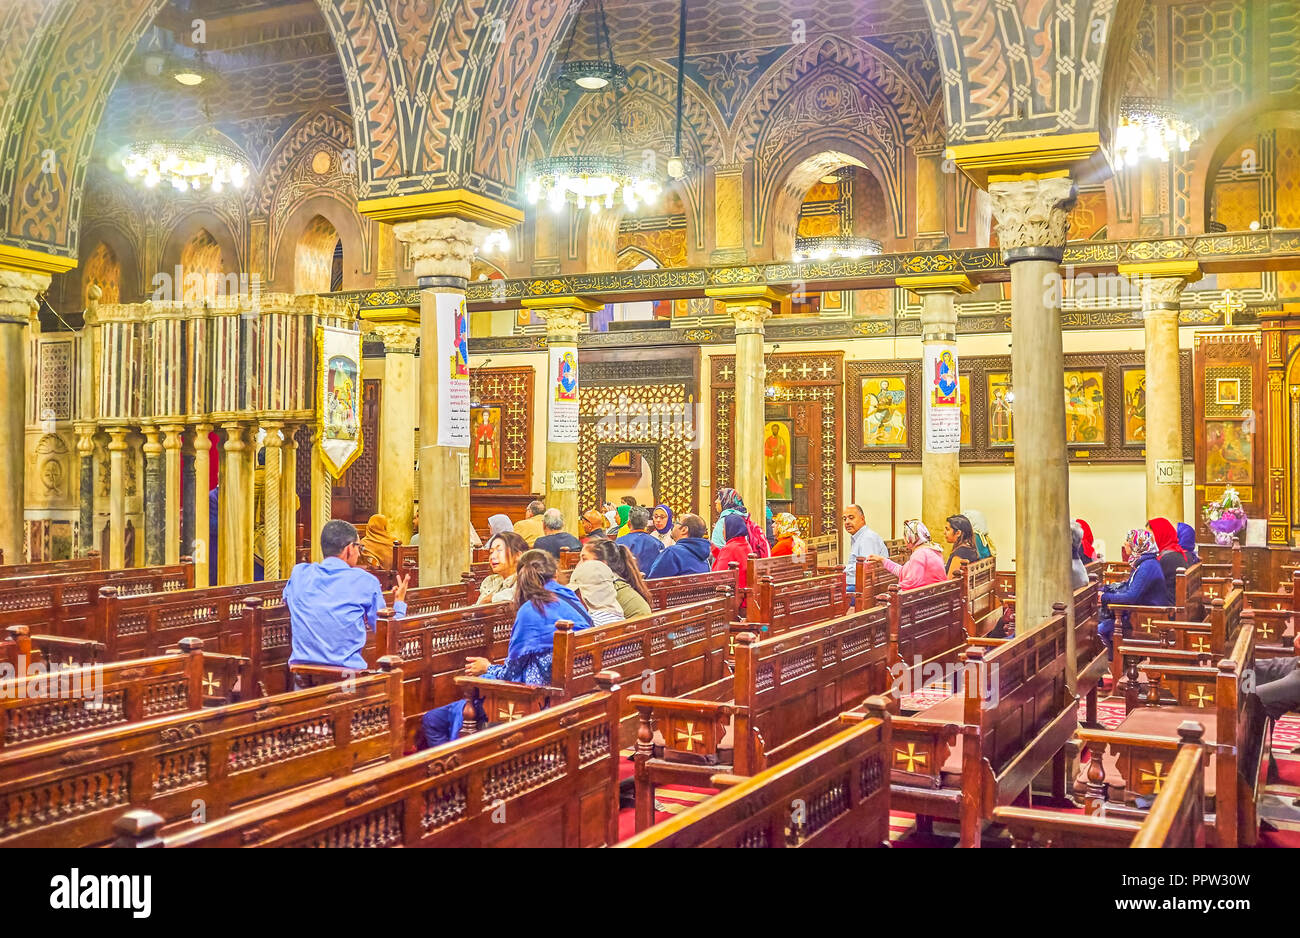 CAIRO, EGYPT - DECEMBER 23, 2017: The interior of the Hanging Church is a fine example of Coptic medieval architectural style with painted walls and i Stock Photo